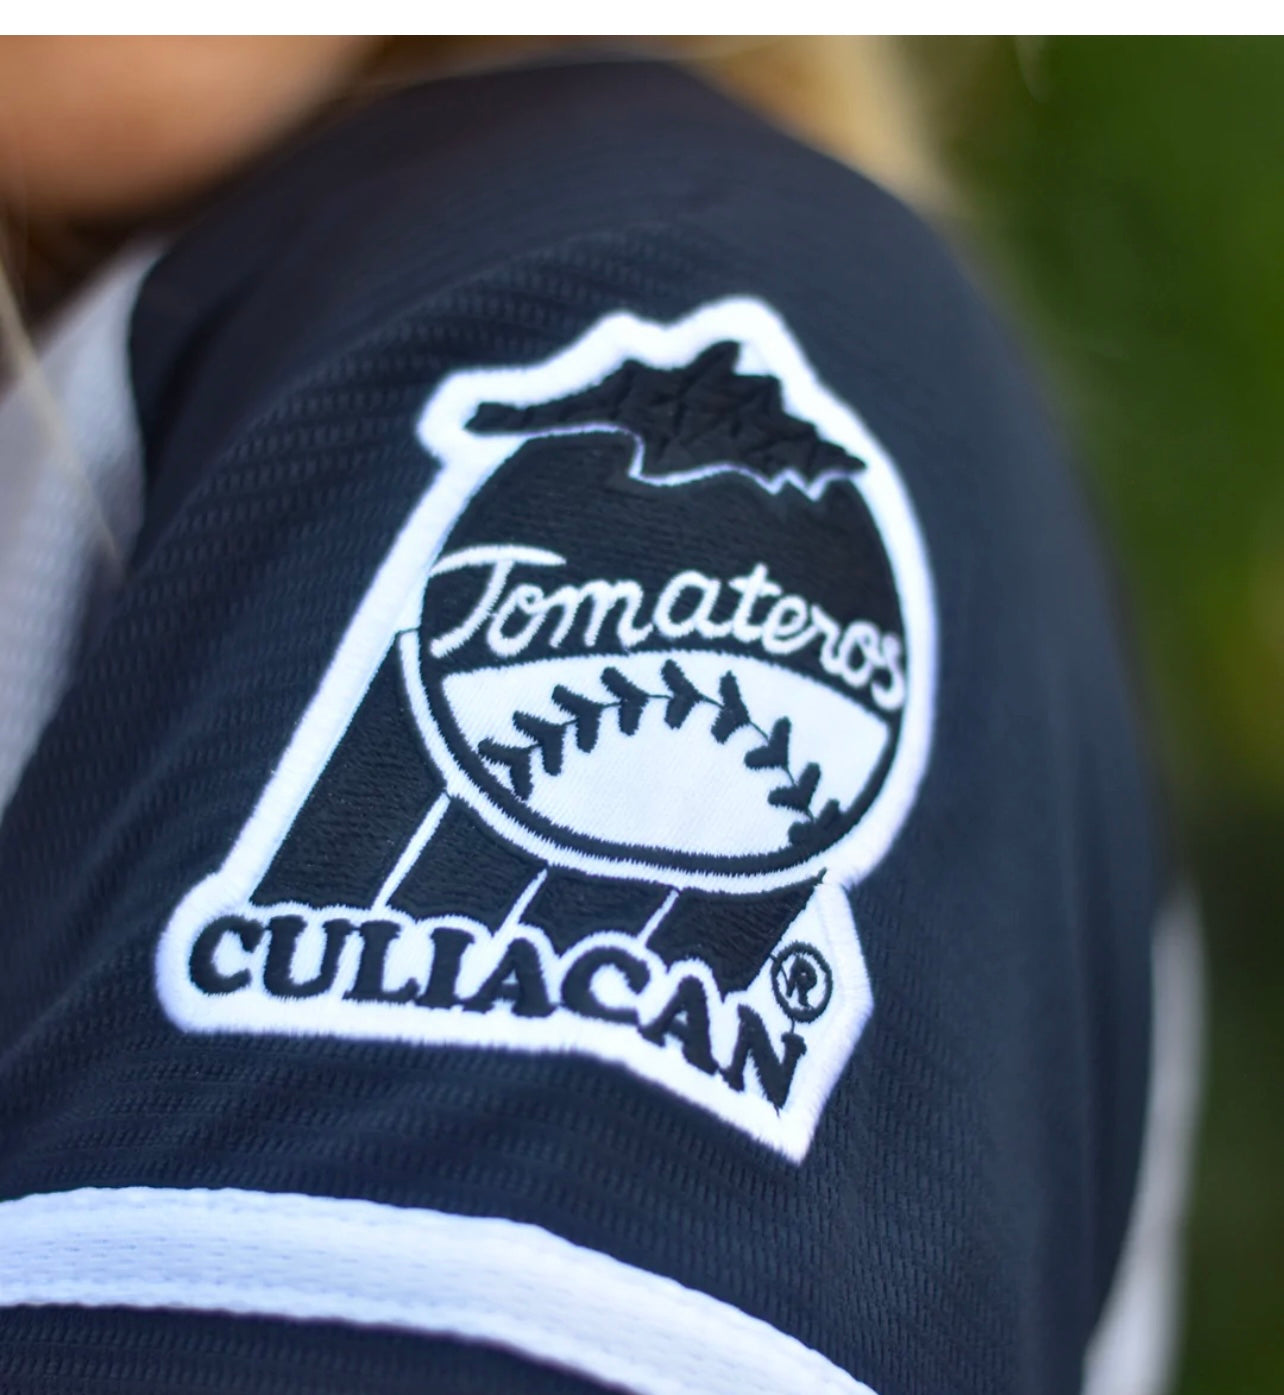 tomateros de culiacan products for sale